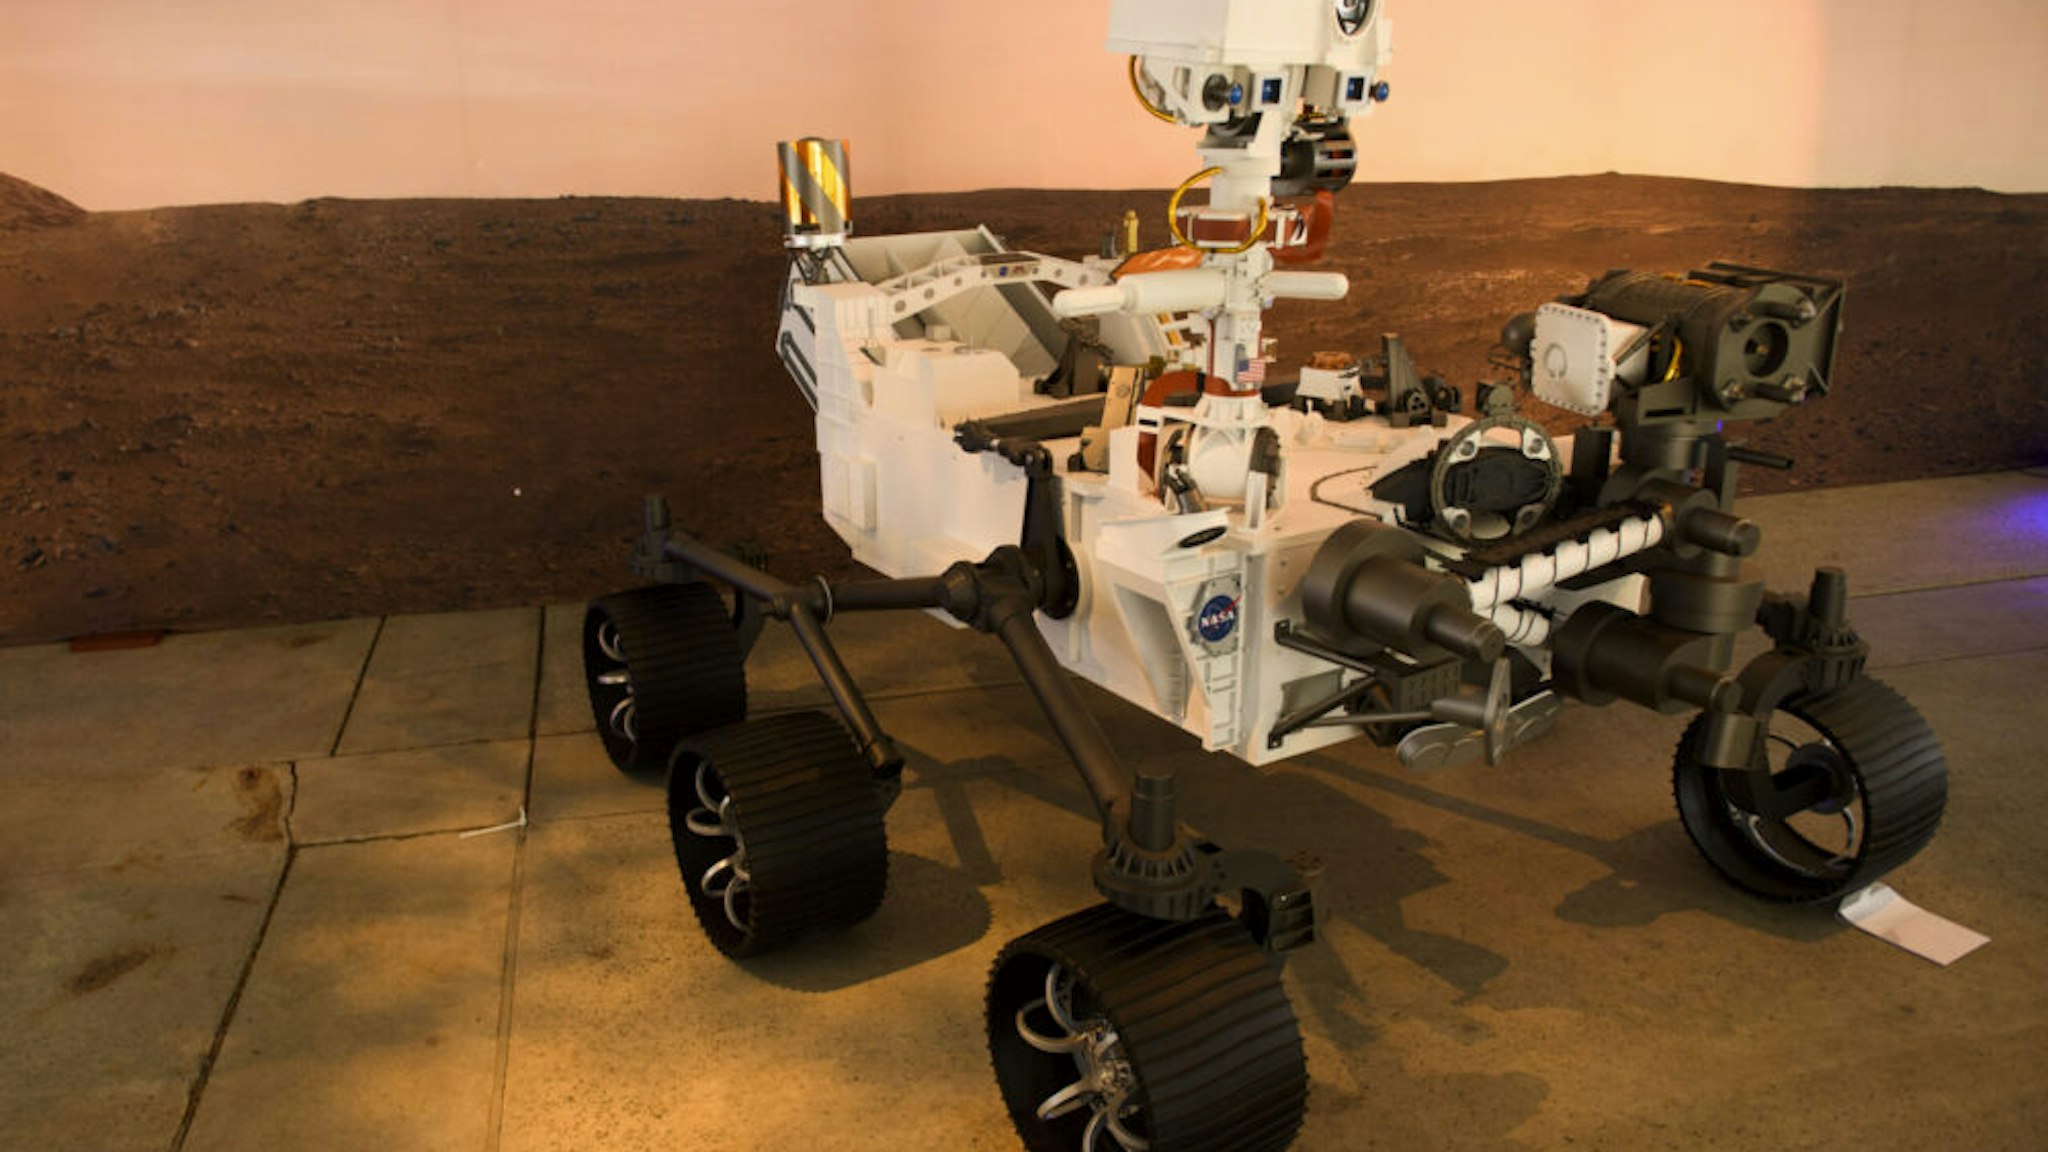 A full scale model of the Mars 2020 Perseverance rover is displayed at NASA's Jet Propulsion Laboratory (JPL) on February 16, 2021 in Pasadena, California. - The Mars exploration rover will search for signs of ancient microbial life and collect rock samples for future return to Earth to study the red planet's geology and climate, paving the way for human exploration. Perseverance also carries the experimental Ingenuity Mars Helicopter - which will attempt the first powered, controlled flight on another planet.